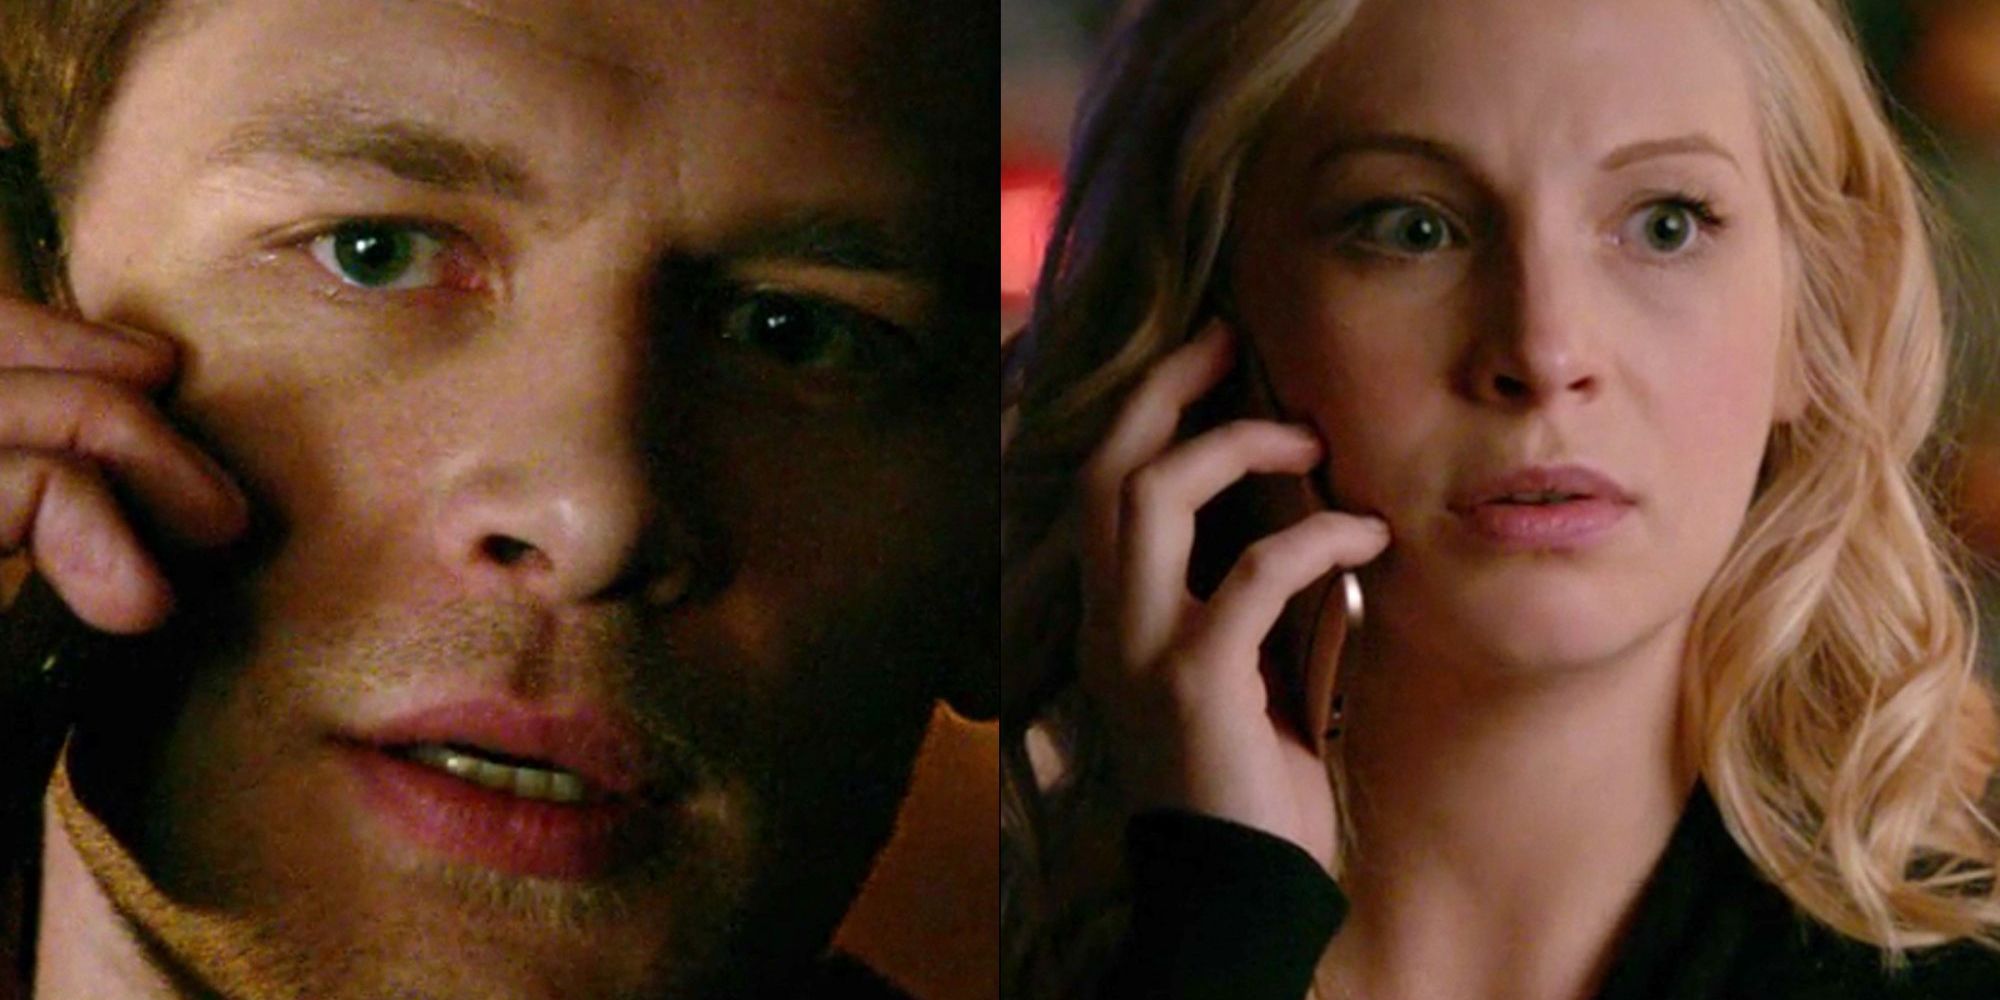 Klaus and Caroline talk on the phone in The Vampire Diaries.